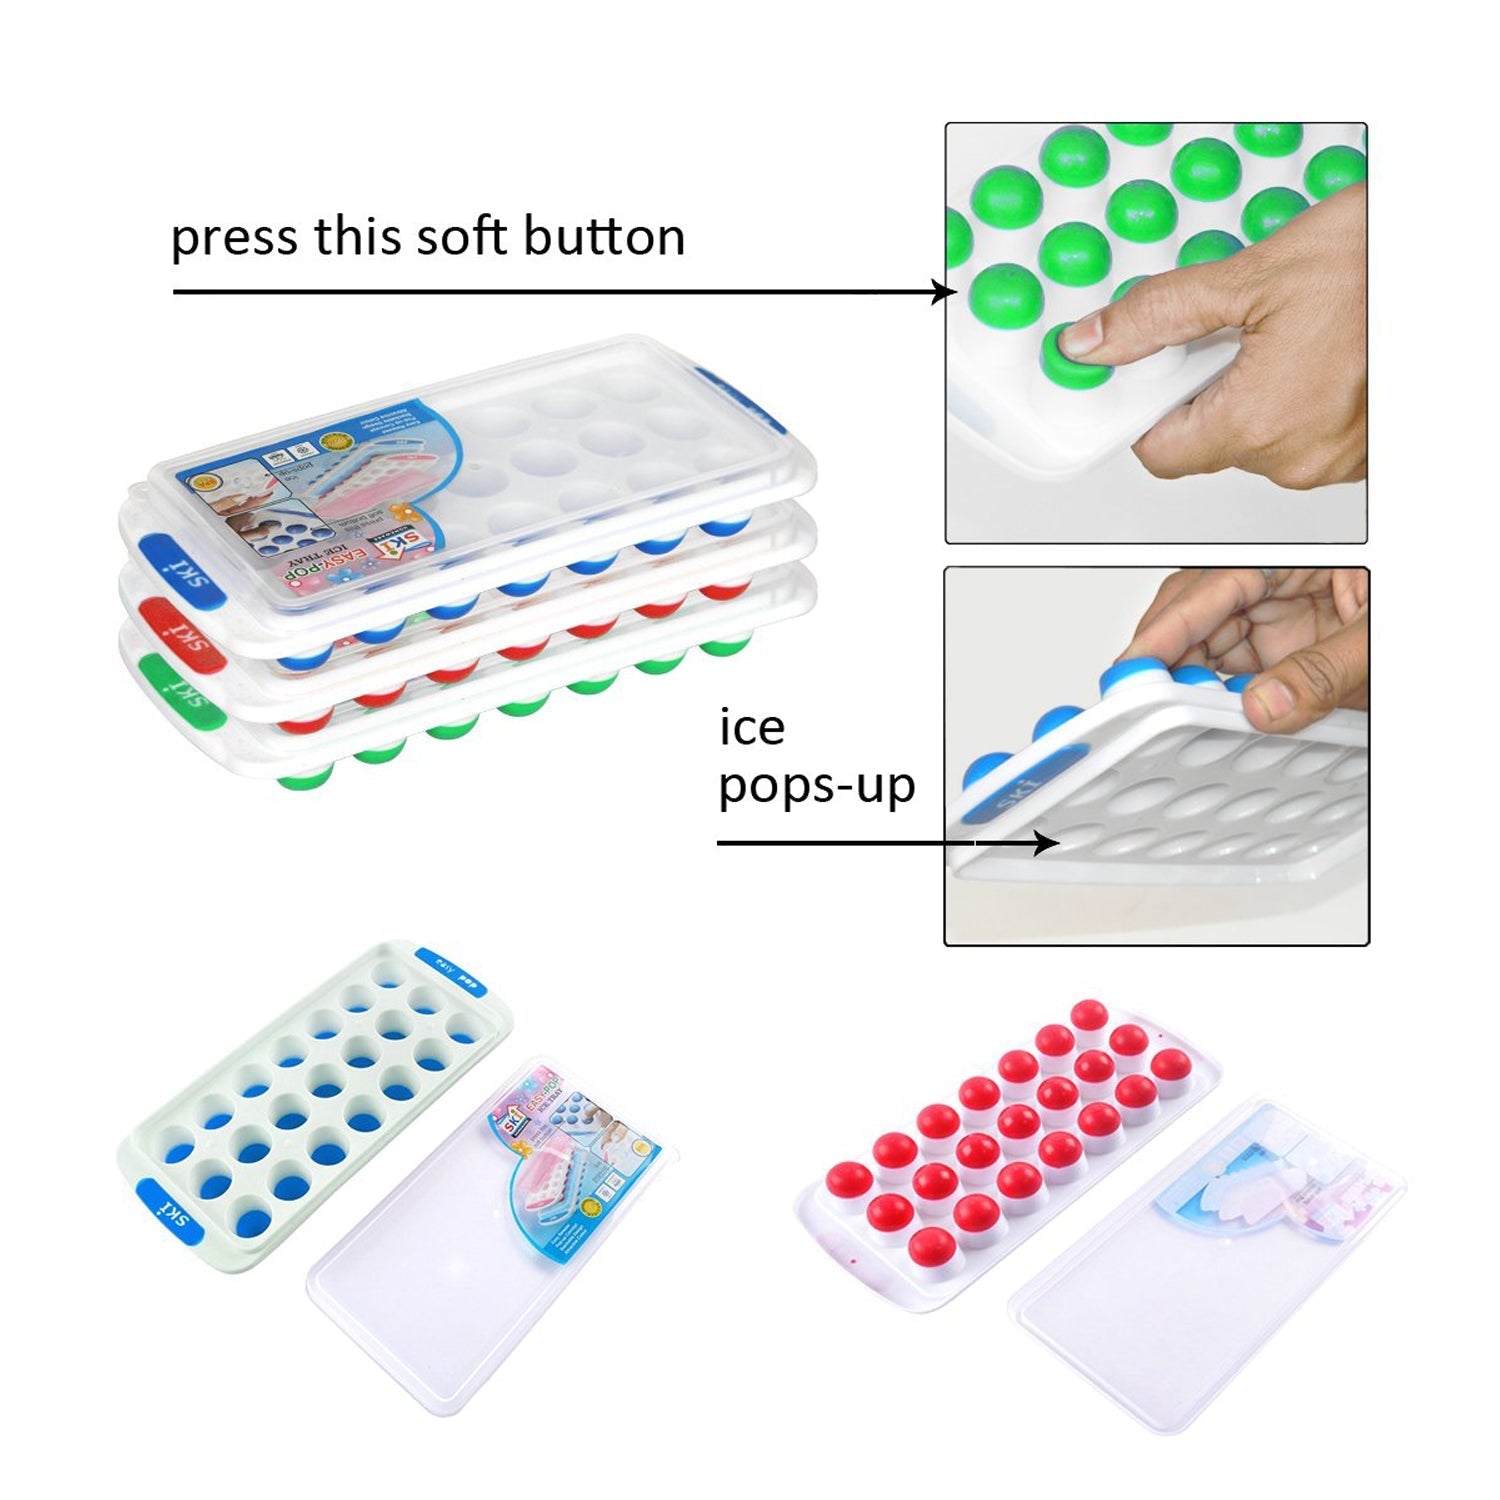 2750 21 Cavity Pop Ice Tray Used for Making Ice's Easily Without Any Difficulty. freeshipping - DeoDap